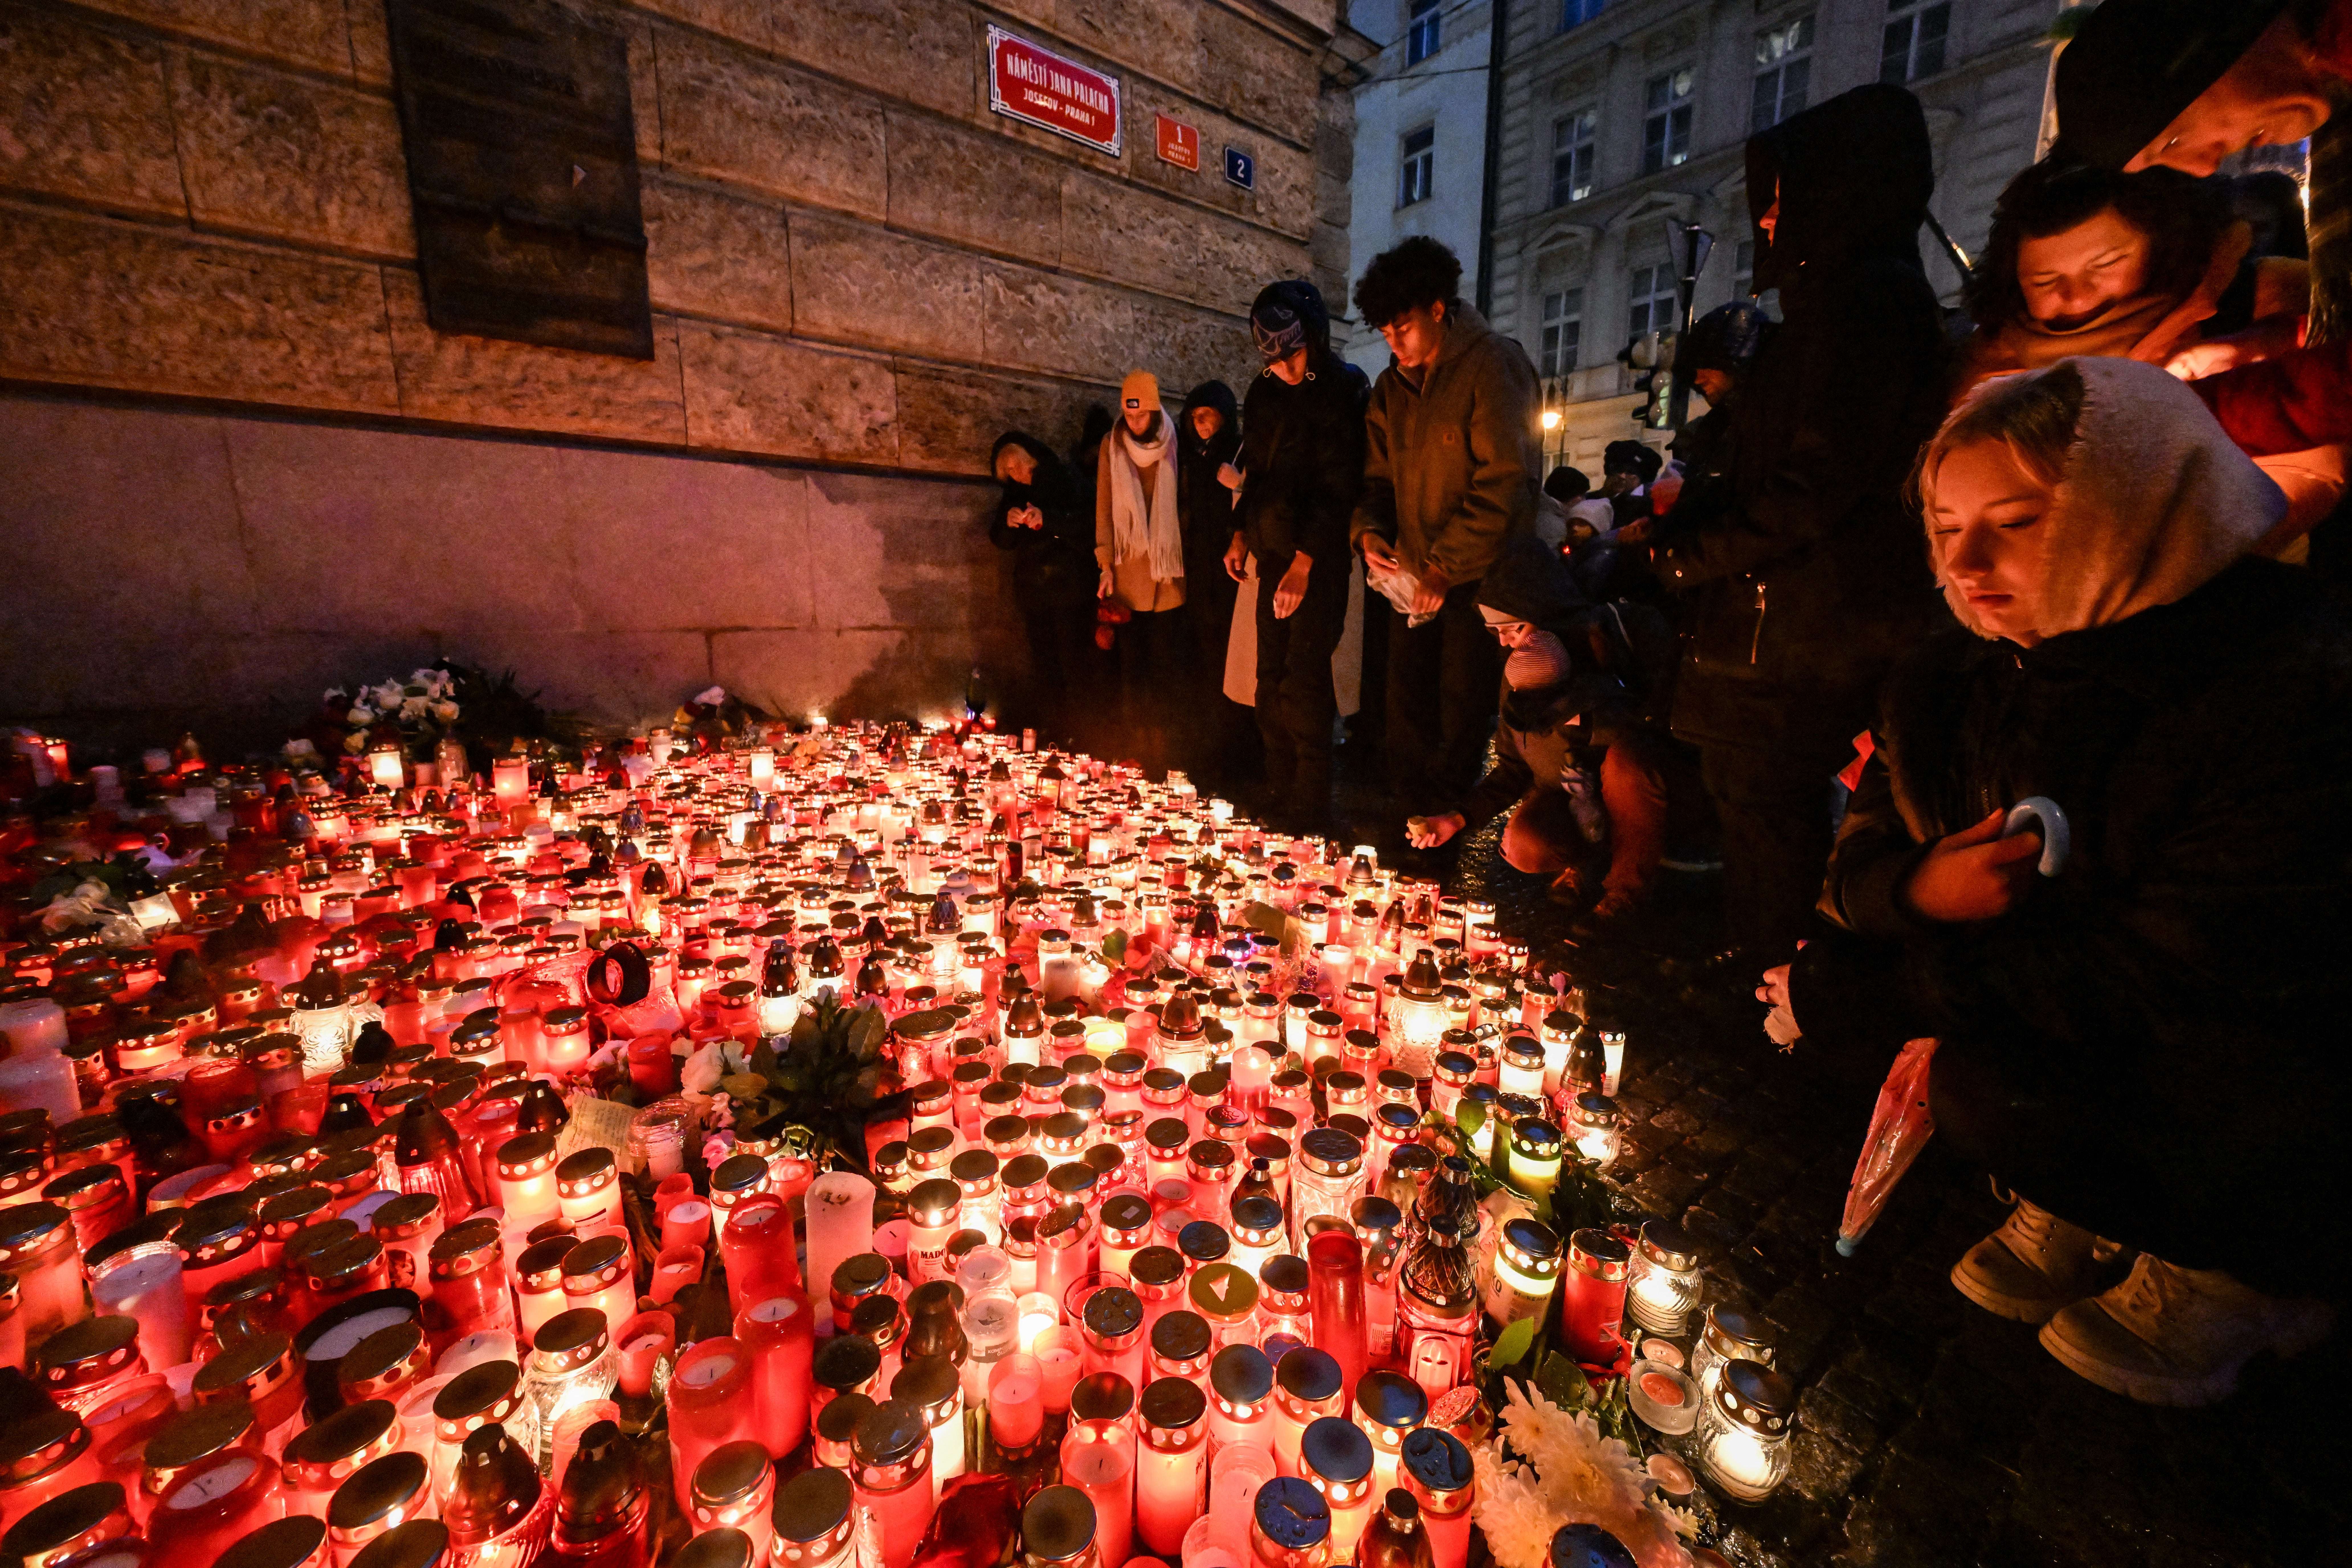 People place candles and flowers at a makeshift memorial for the victims of the Charles University shooting outside the Charles University in central Prague on Saturday